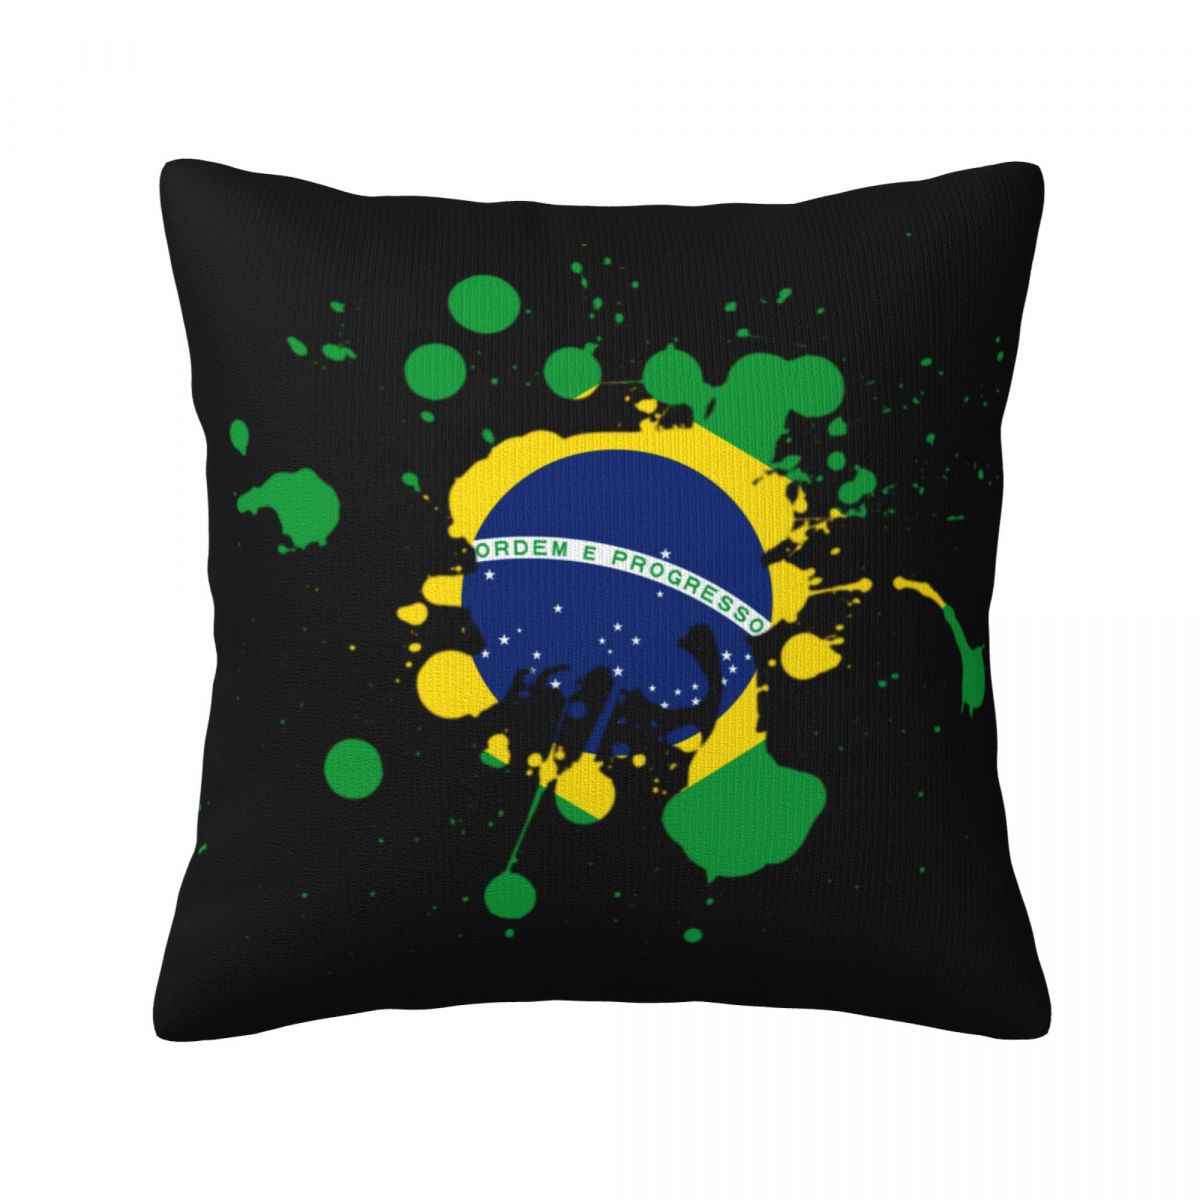 Brazil Ink Spatter Throw Pillow Covers 18x18